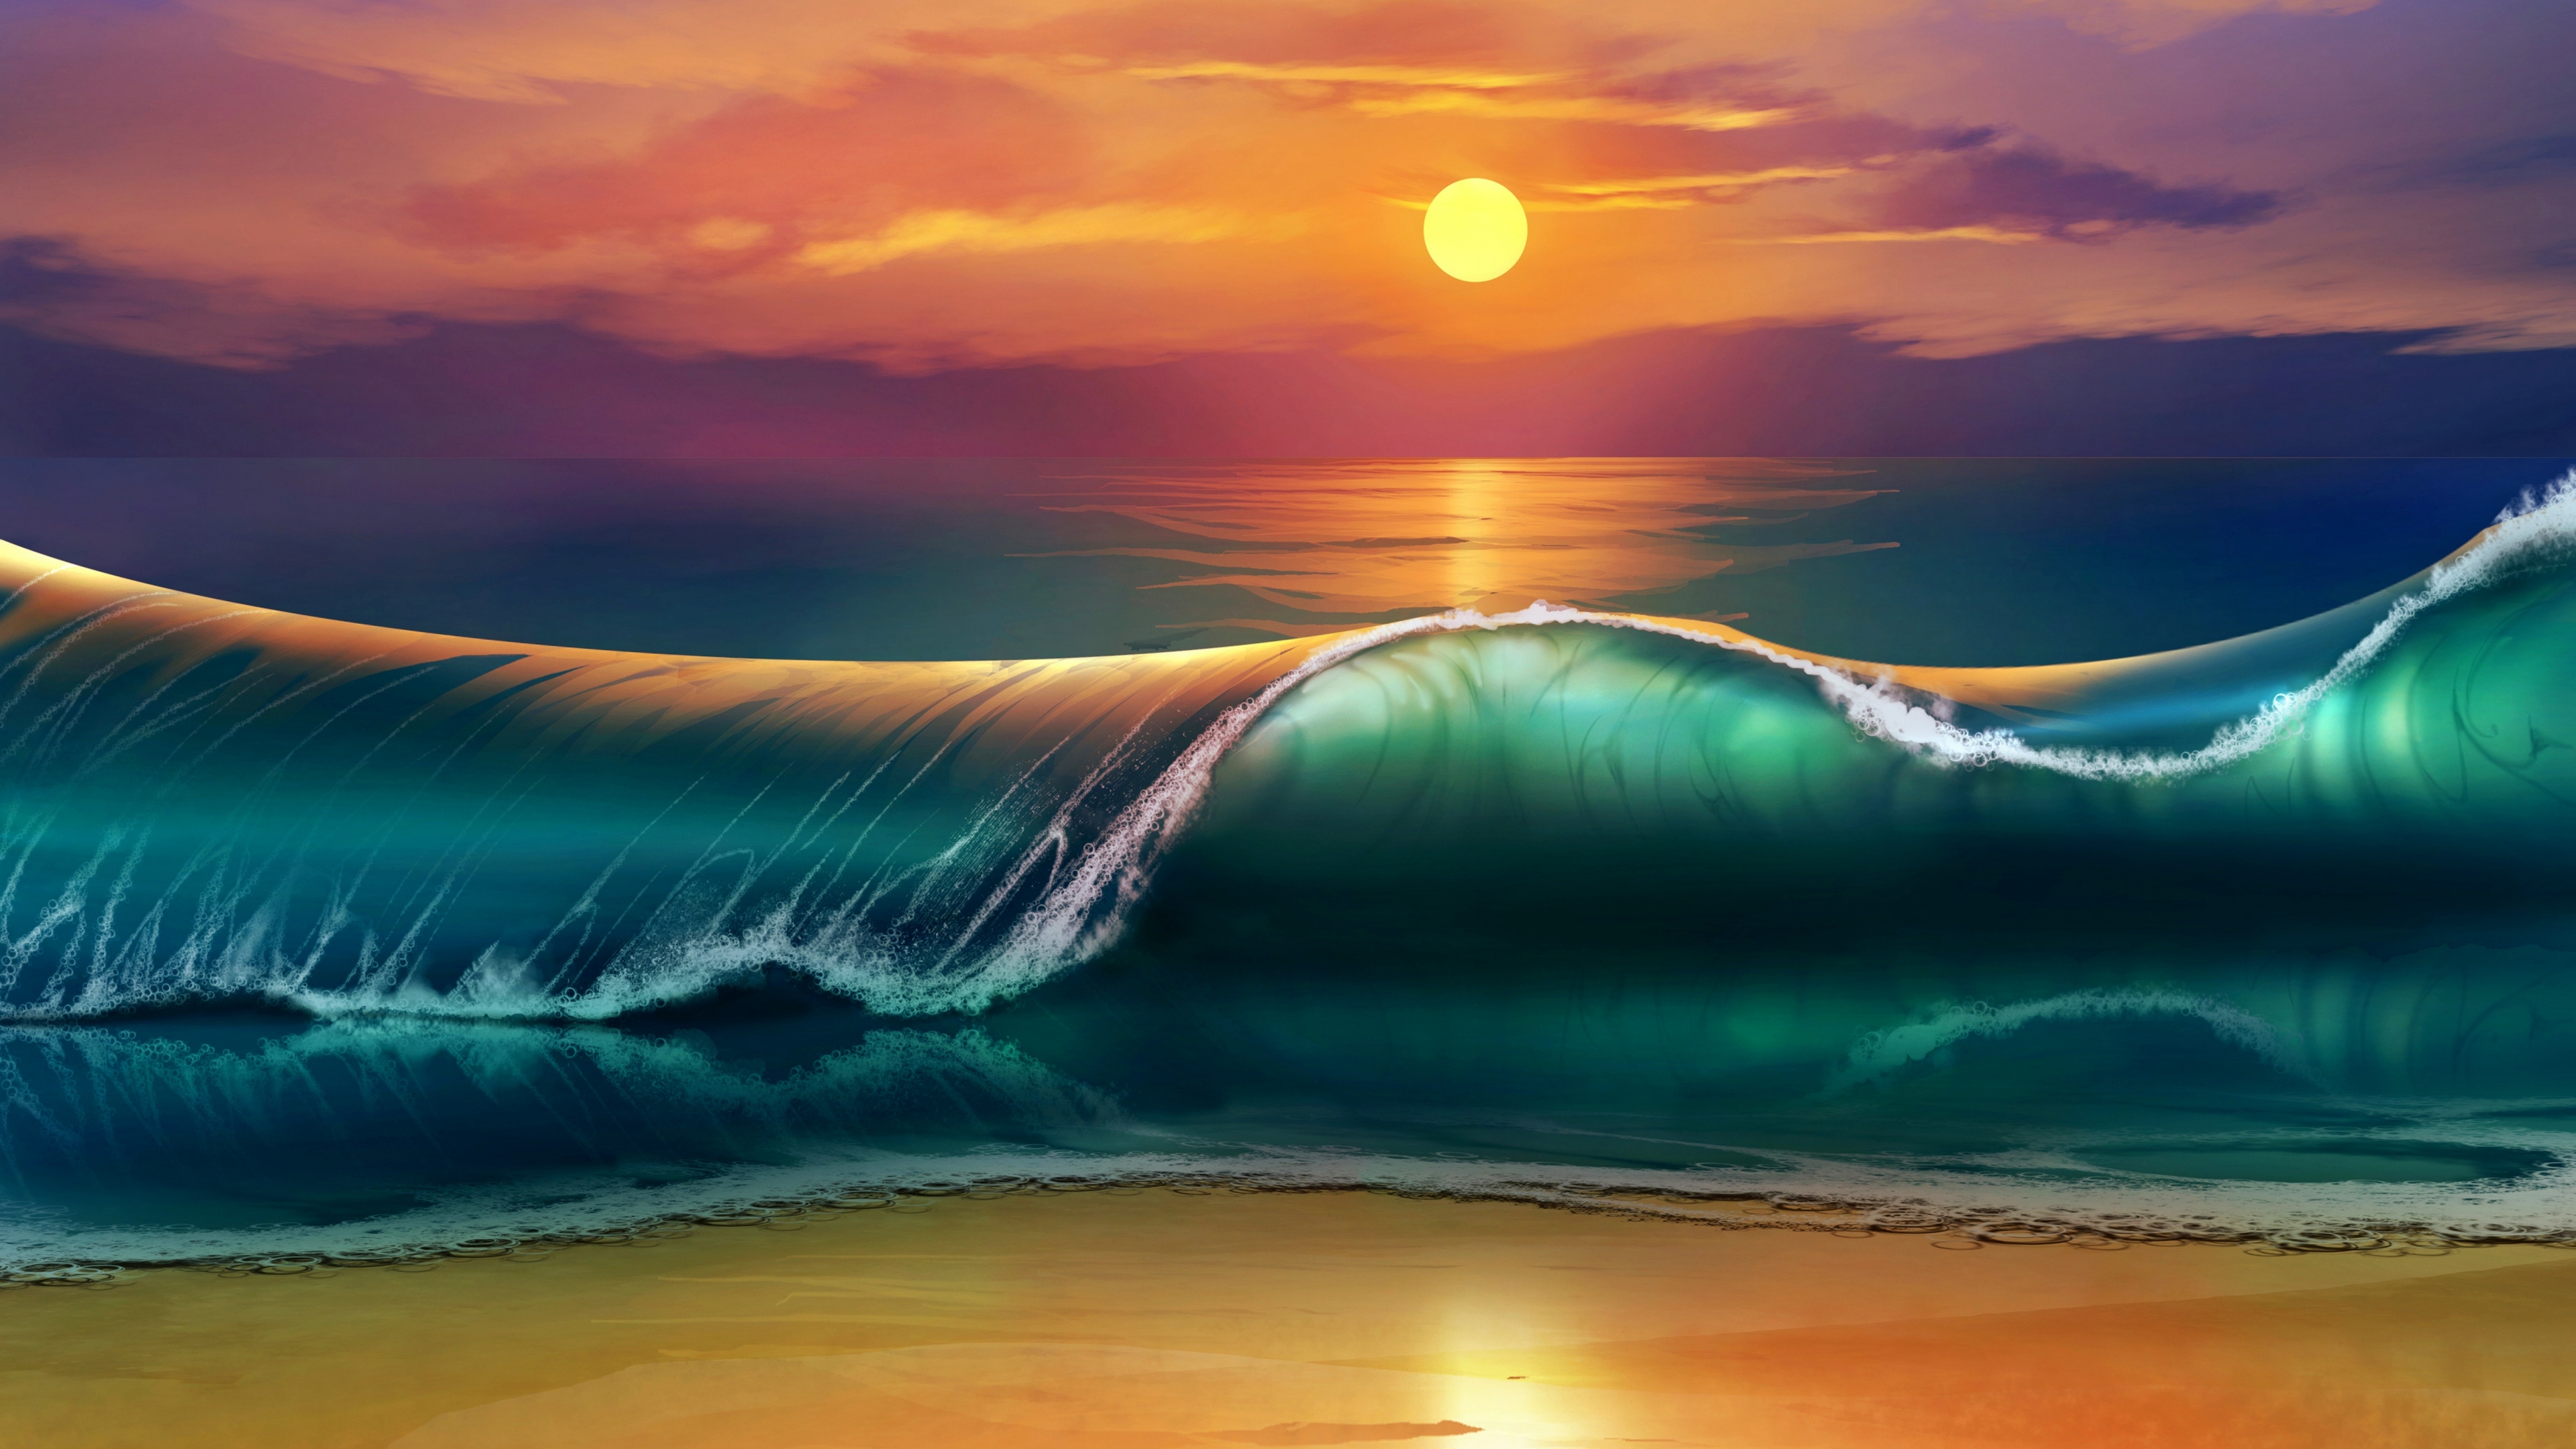 The Sunset Art Hd Artist 4k Wallpapers Images Backgrounds Photos